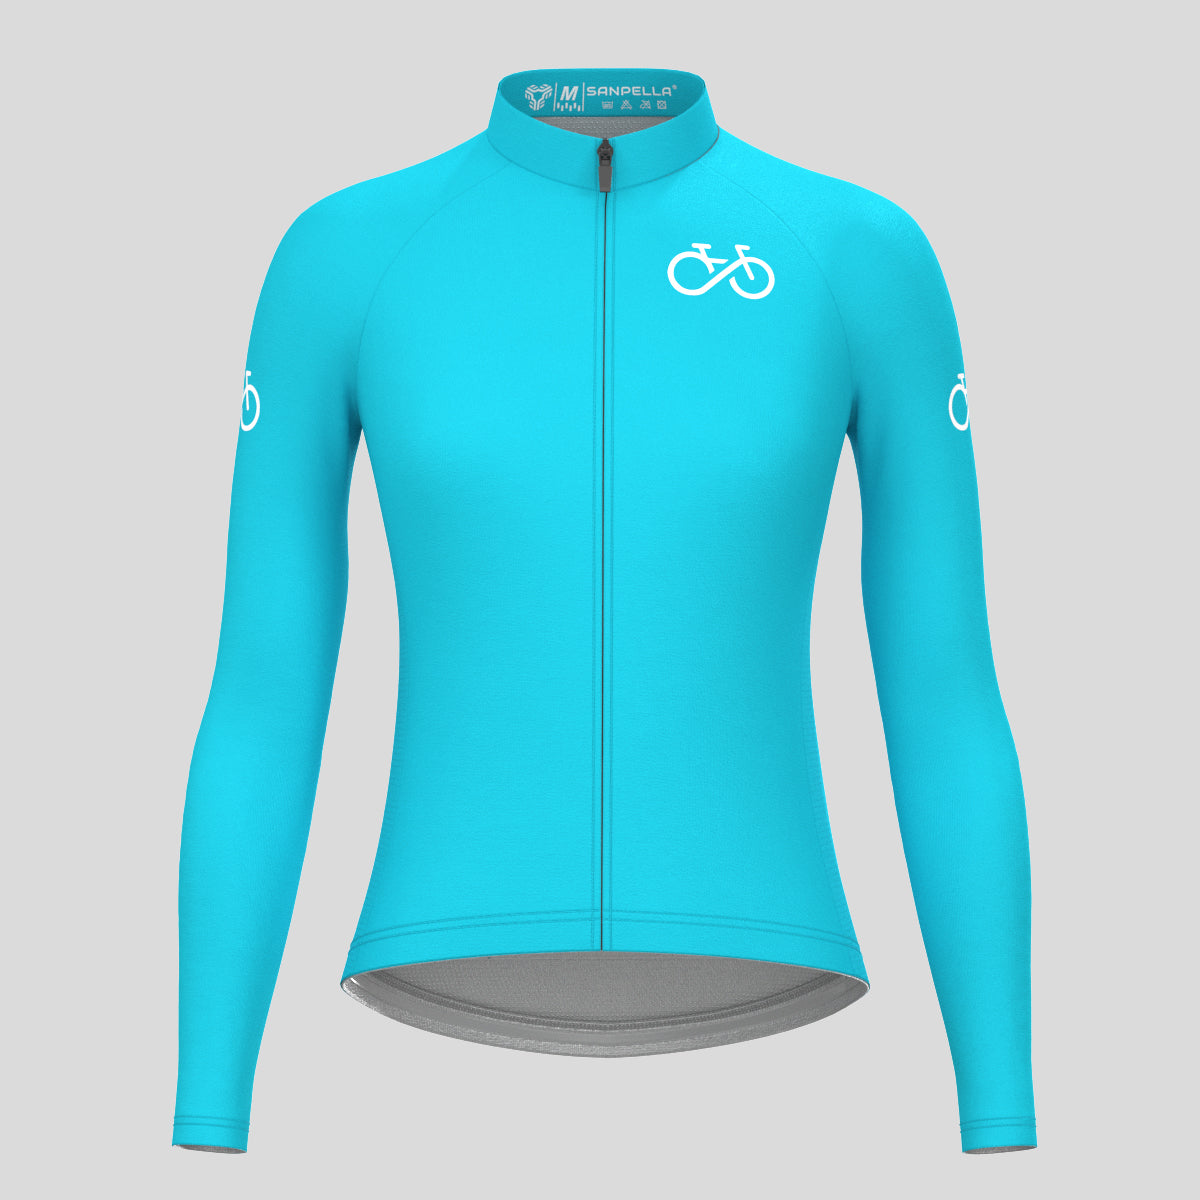 Ride Forever Women's LS Cycling Jersey - Ocean